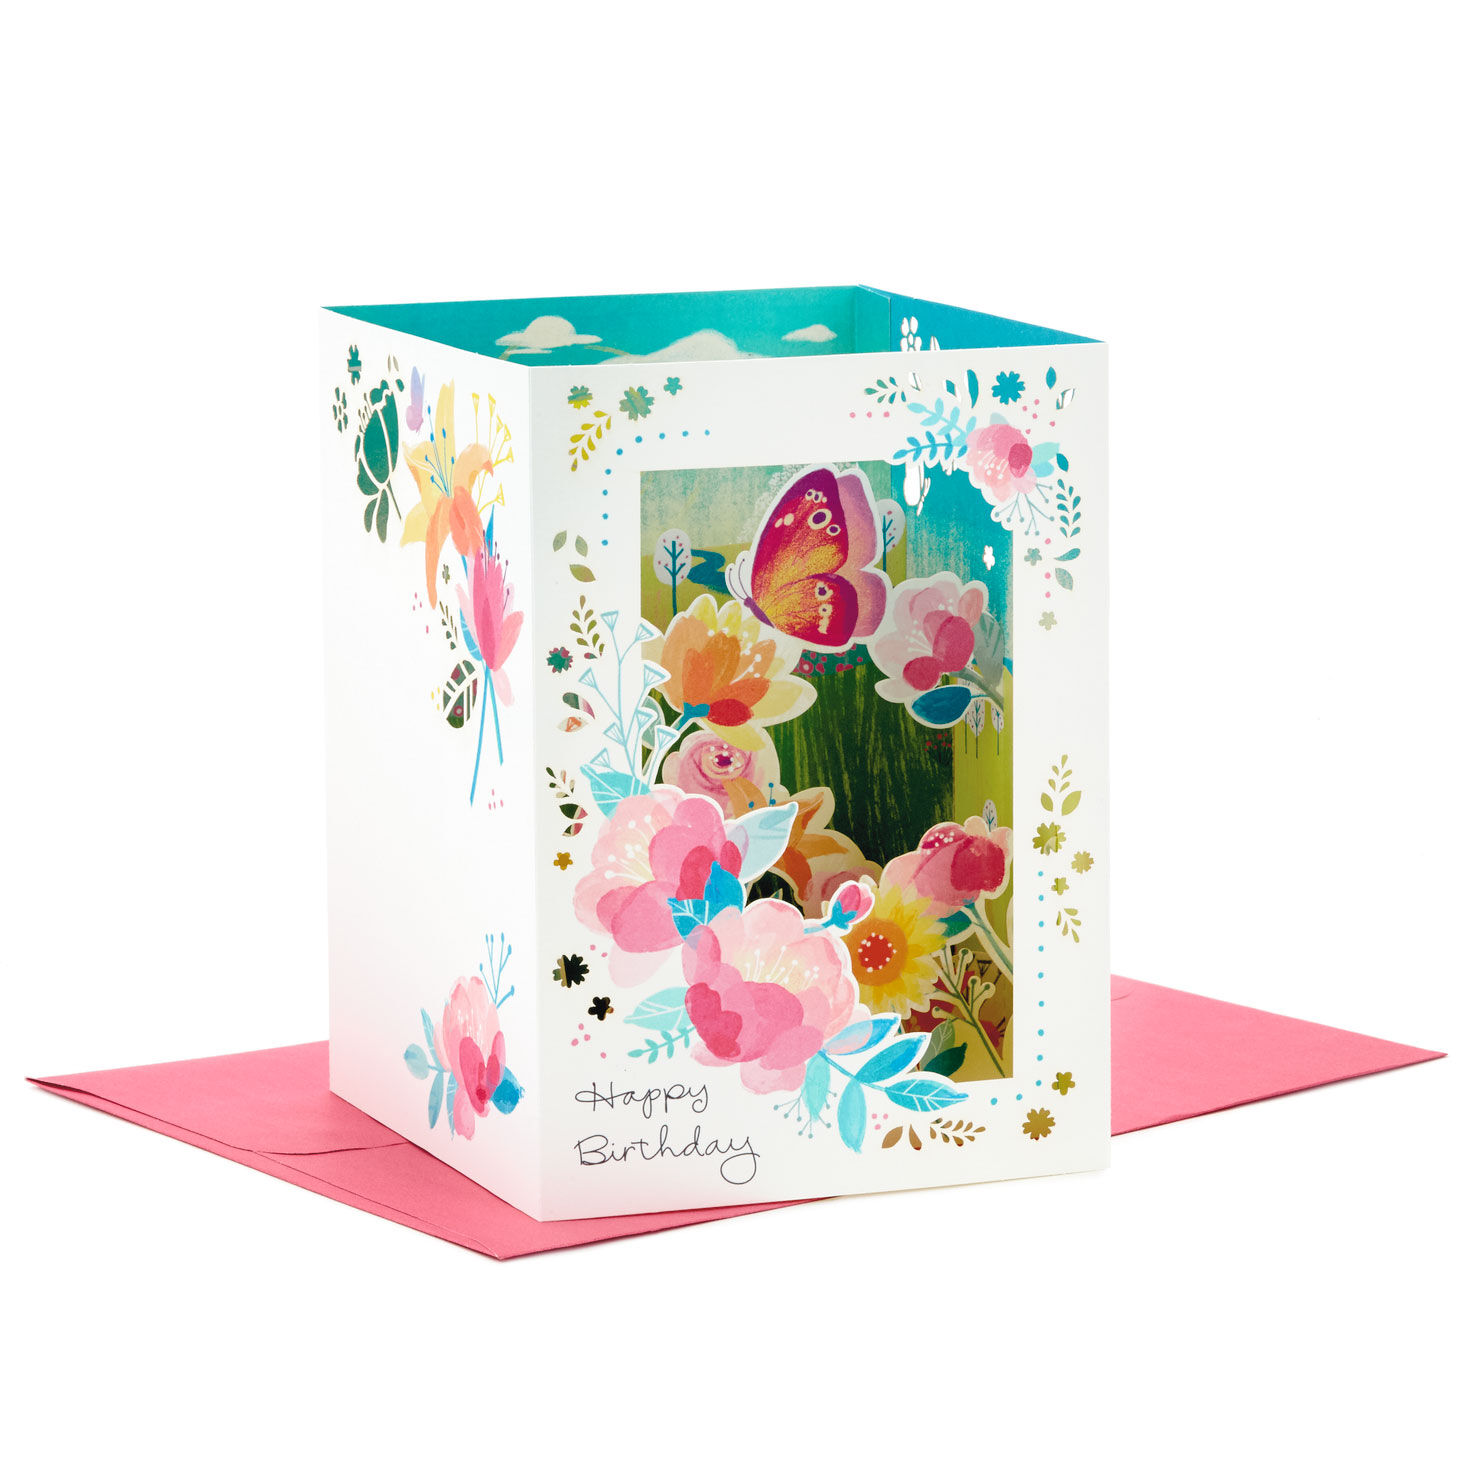 Beautiful Year Butterfly on Flowers 3D Pop-Up Birthday Card for only USD 8.99 | Hallmark